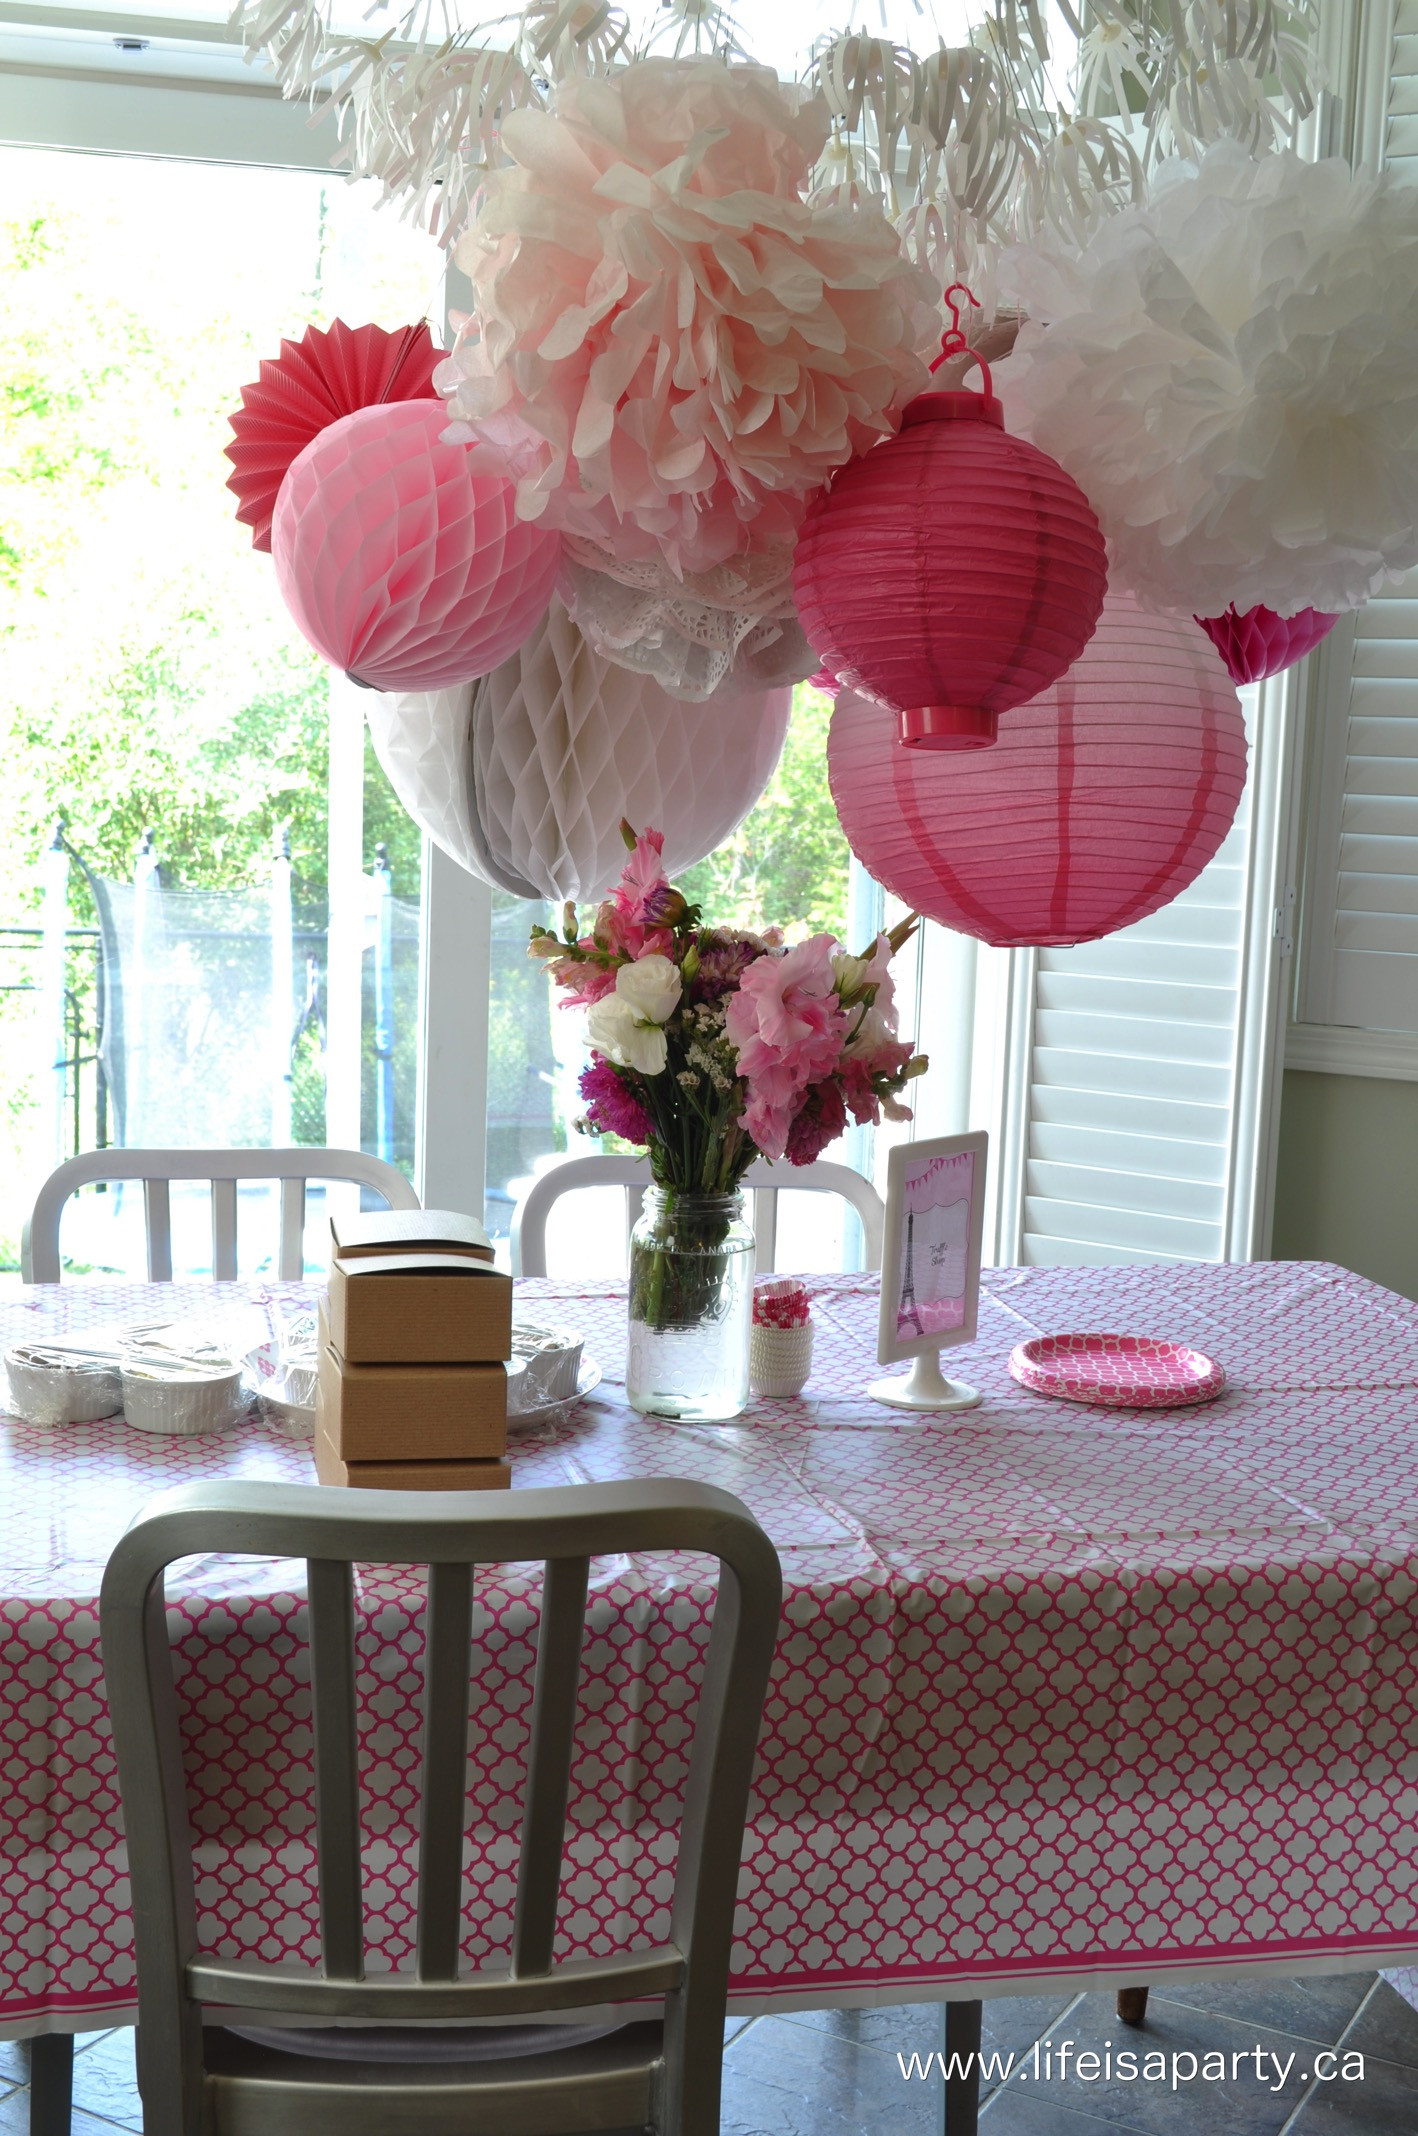 Parisian Birthday Party Decorations
 Paris Birthday Party Part e Party Activities and